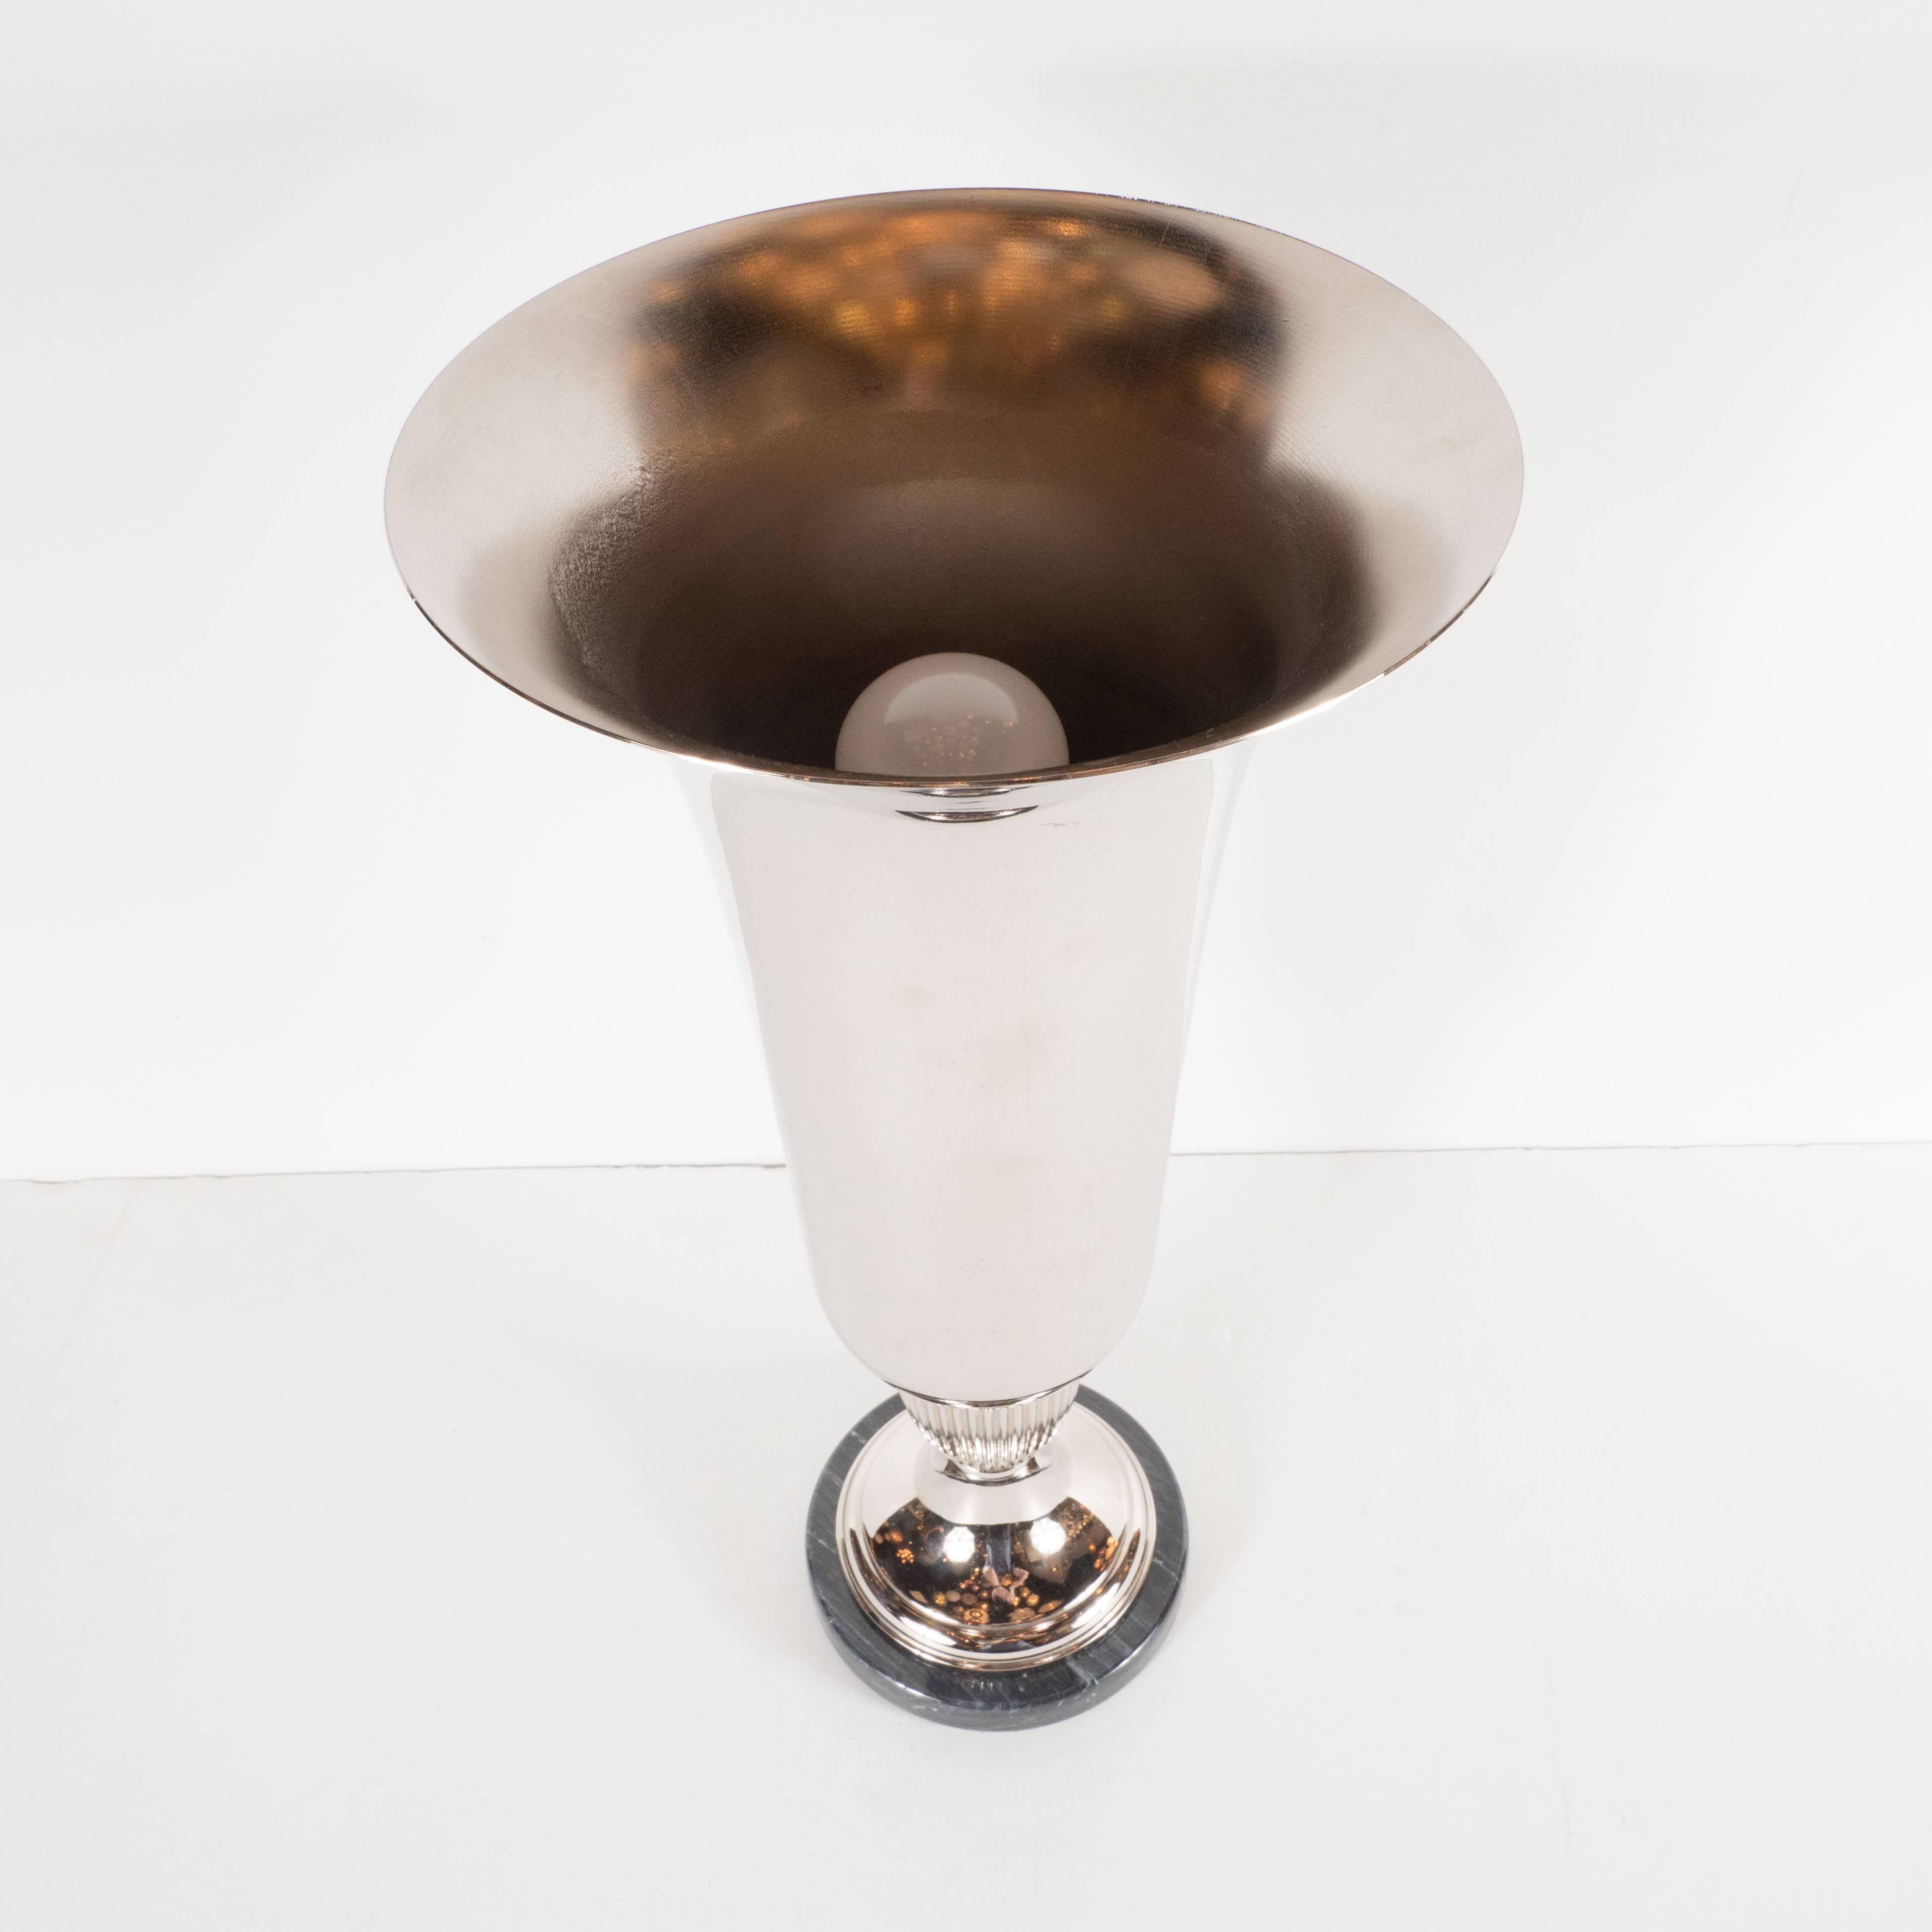 This pair of uplights features lustrous chrome perched atop smoky marble bases. Reminiscent of classical urns, these Art Deco lights have stunning striations- Art Deco flourishes which animate the otherwise austere form. The bell shaped uplights,